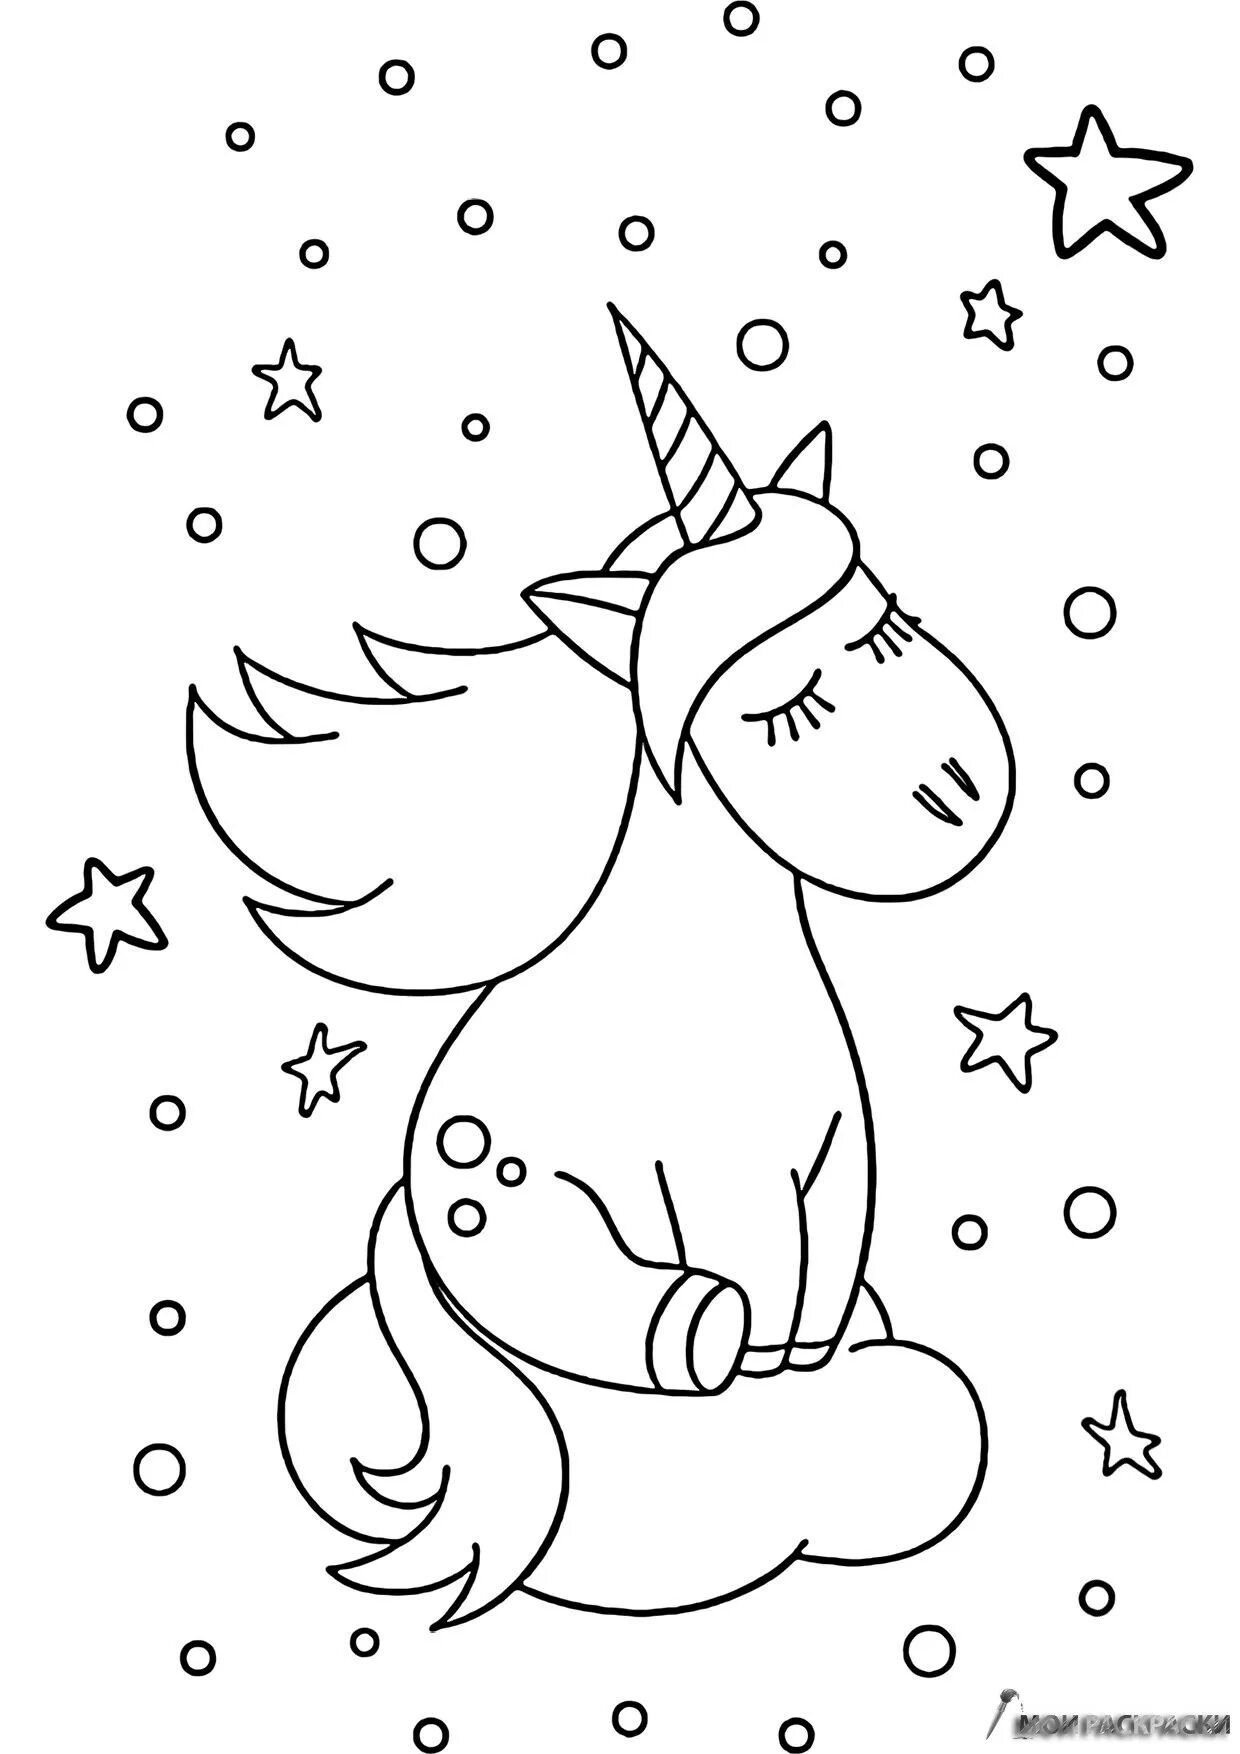 Generous New Year's unicorn coloring page